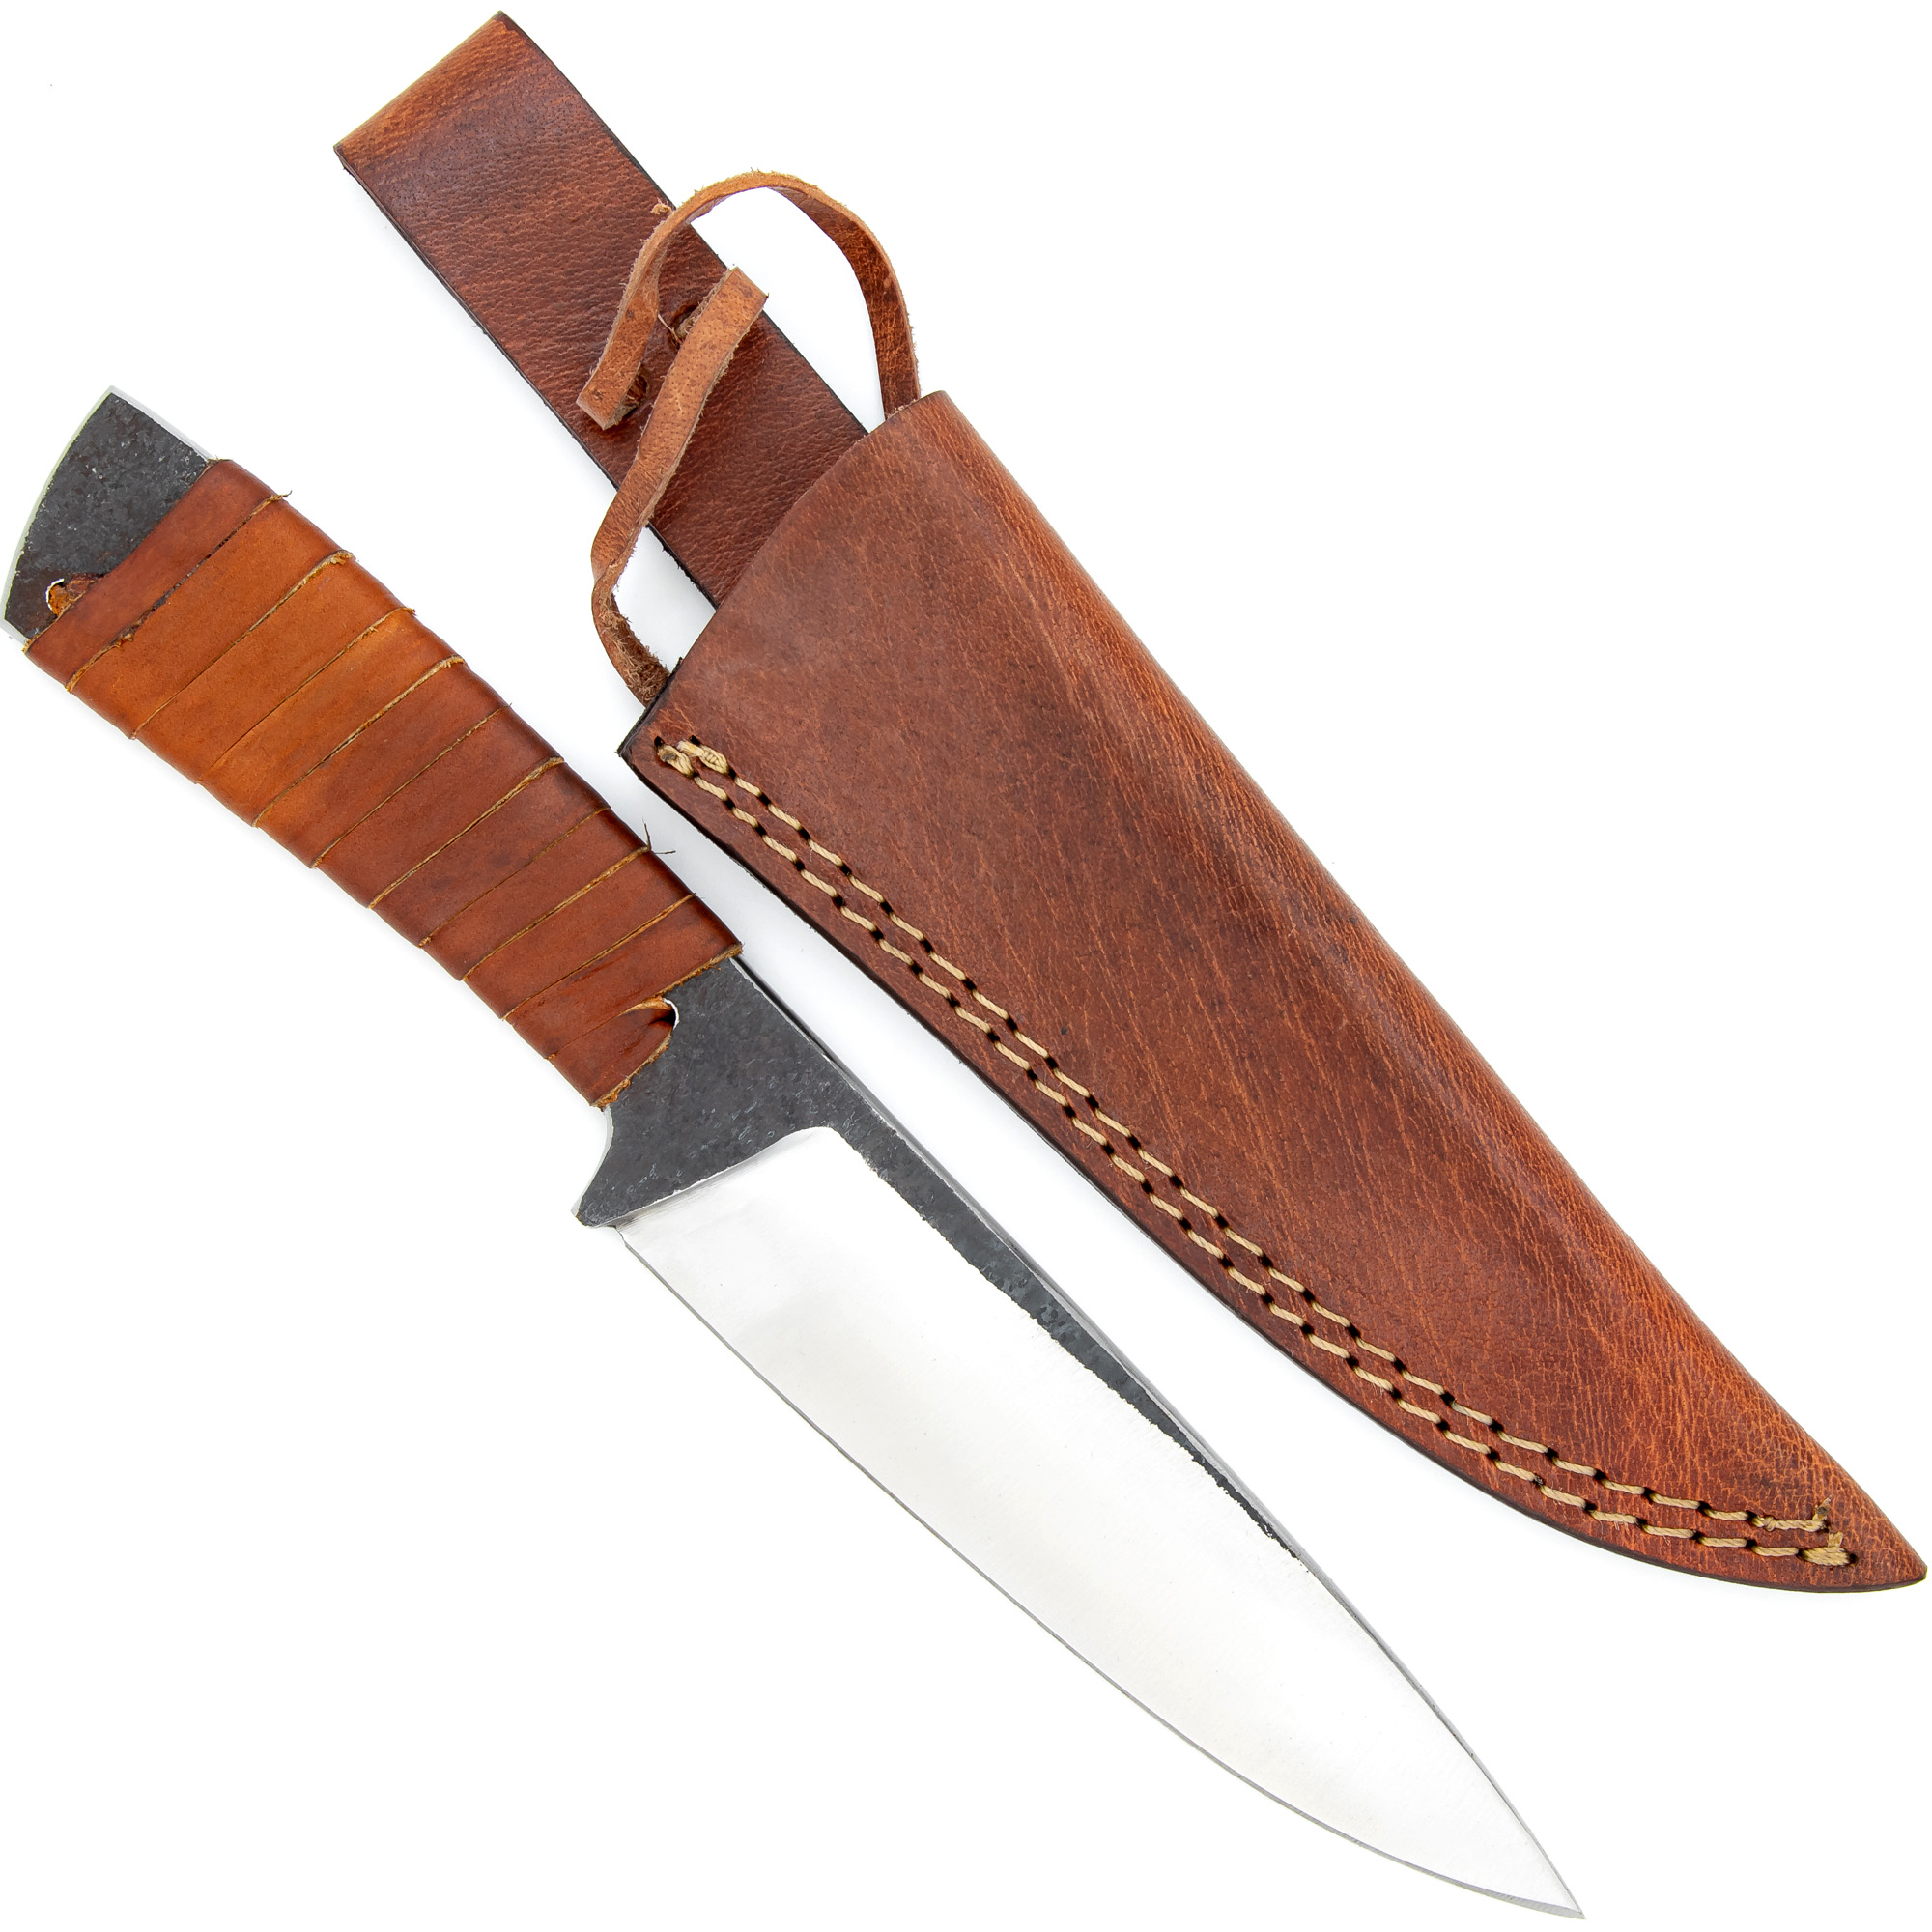 All or Nothing Full Tang Carbon Steel Outdoor KNIFE with Genuine Leather Sheath